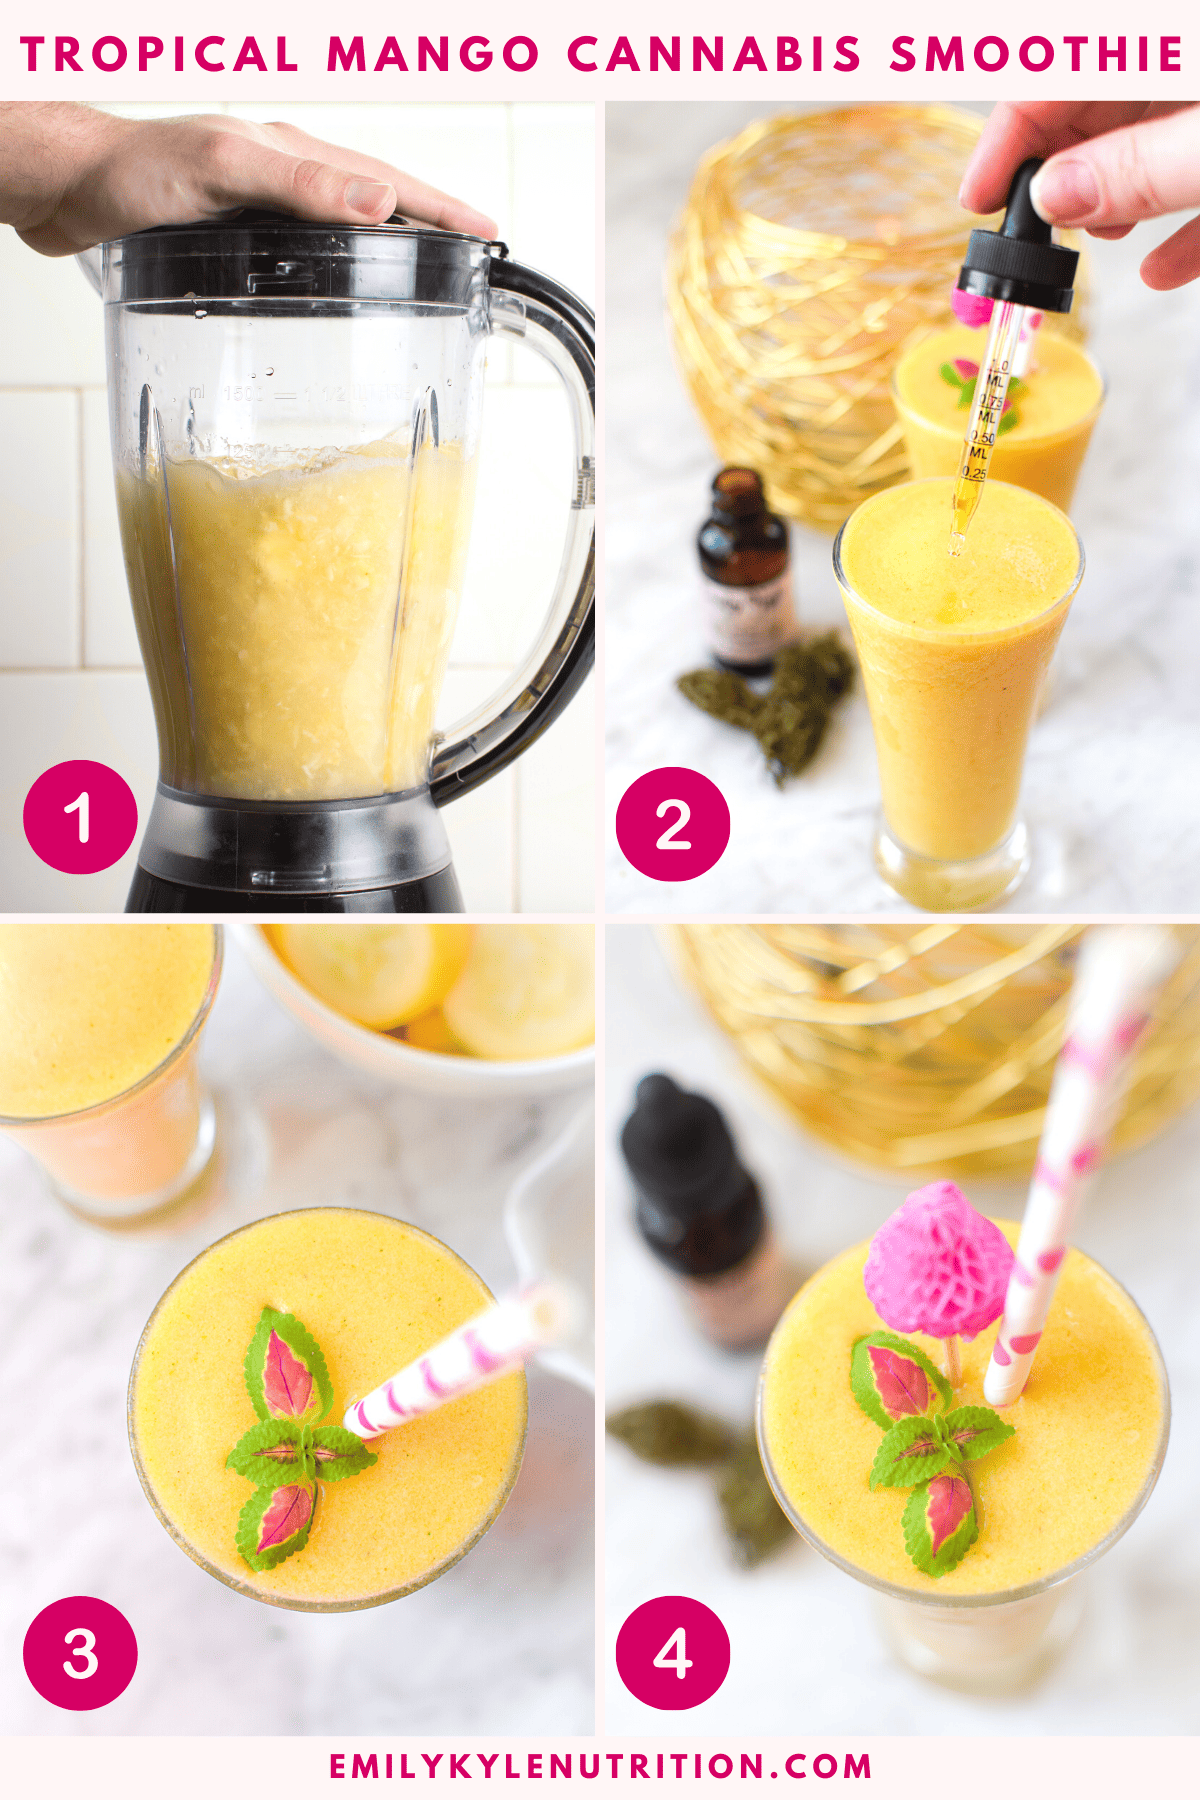 A step-by-step image collage for a tropical cannabis smoothie. 